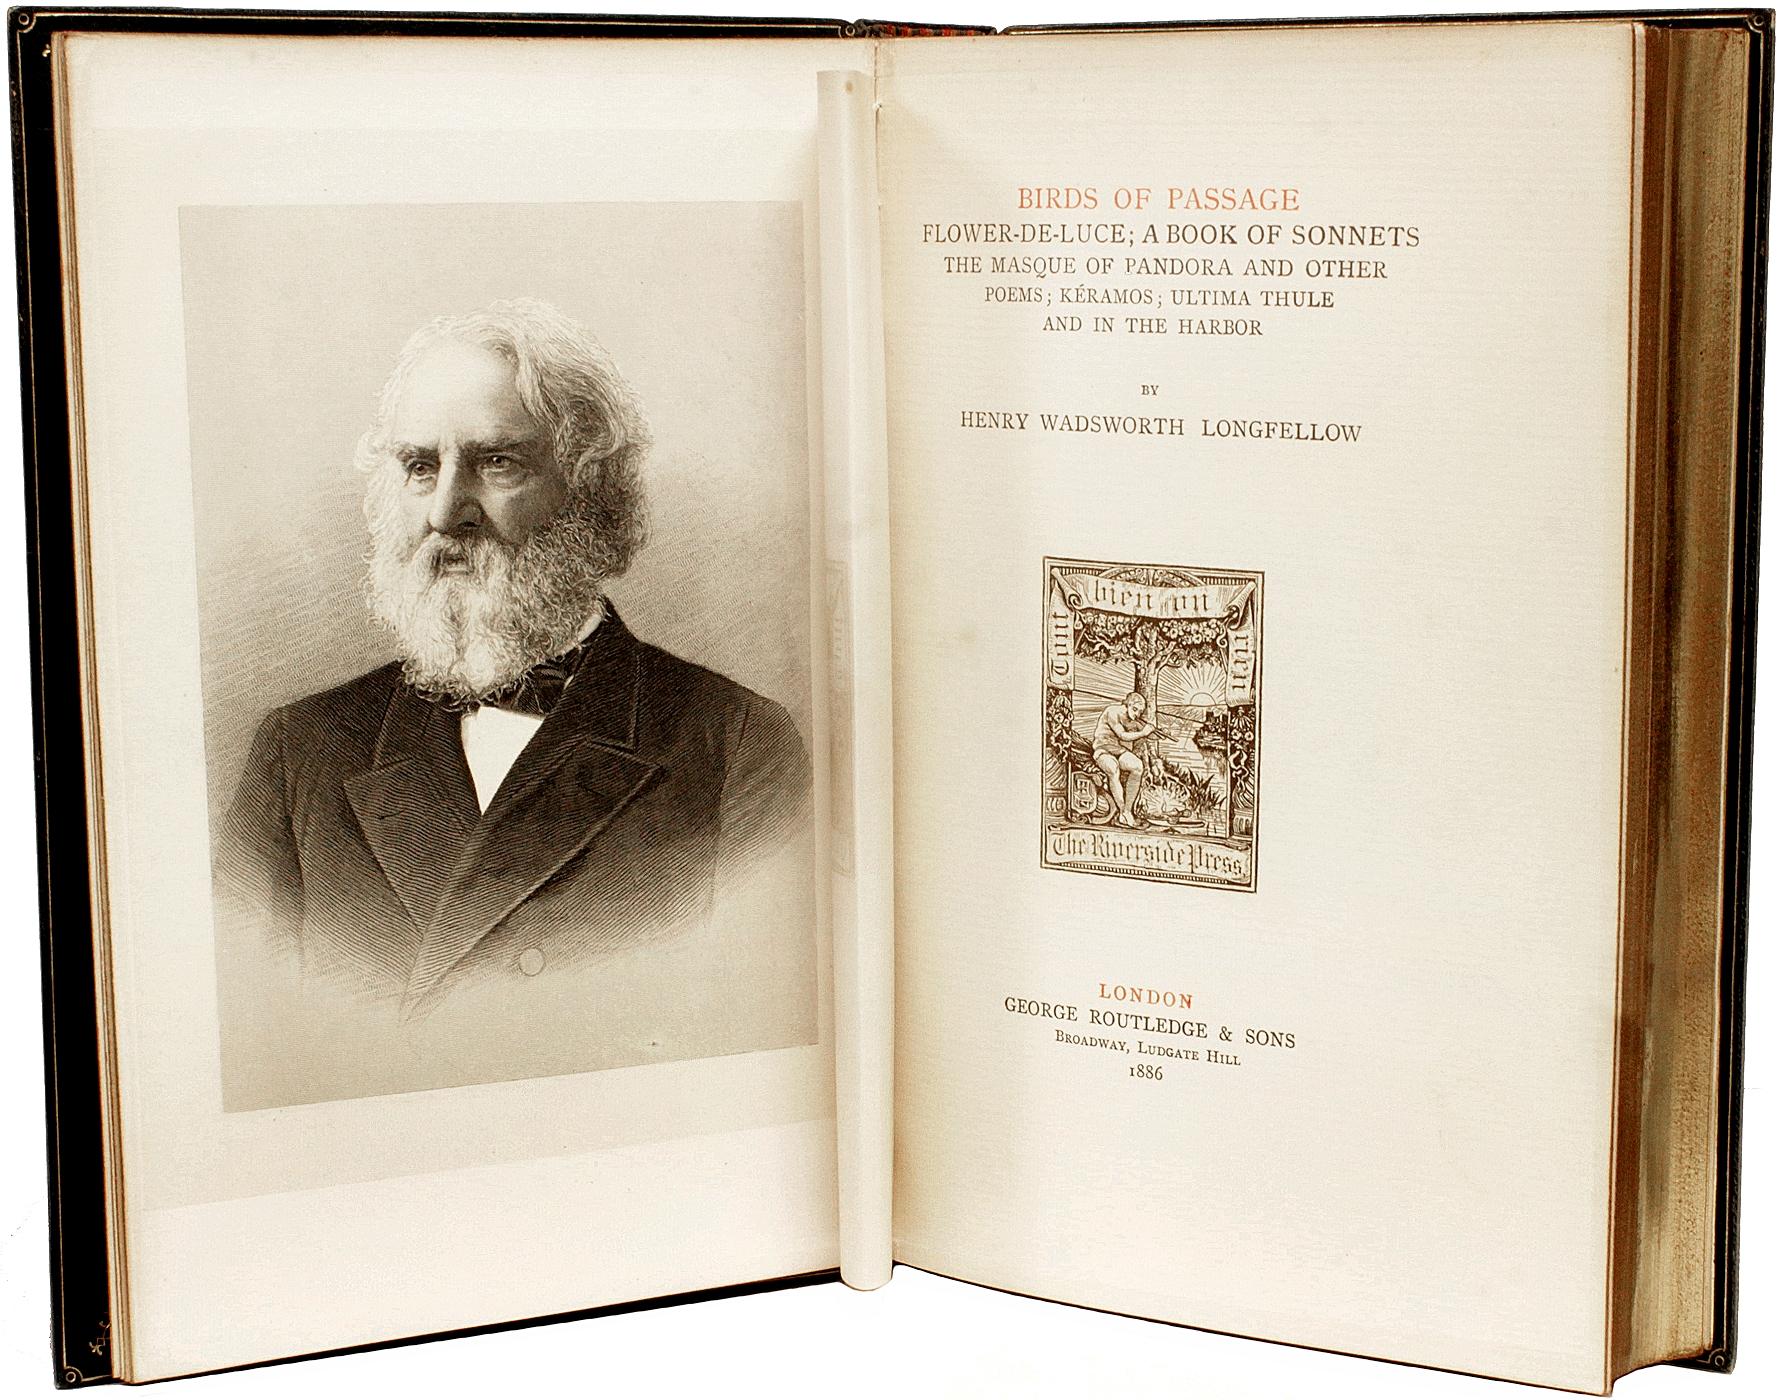 AUTHOR: LONGFELLOW, Henry Wadsworth. 

TITLE: The Complete Writings of Henry Wadsworth Longfellow, with Biographical and Critical Notes.

PUBLISHER: London: George Routledge & Sons, 1886.

DESCRIPTION: LARGE PAPER EDITION. 11 vols., 8-3/4